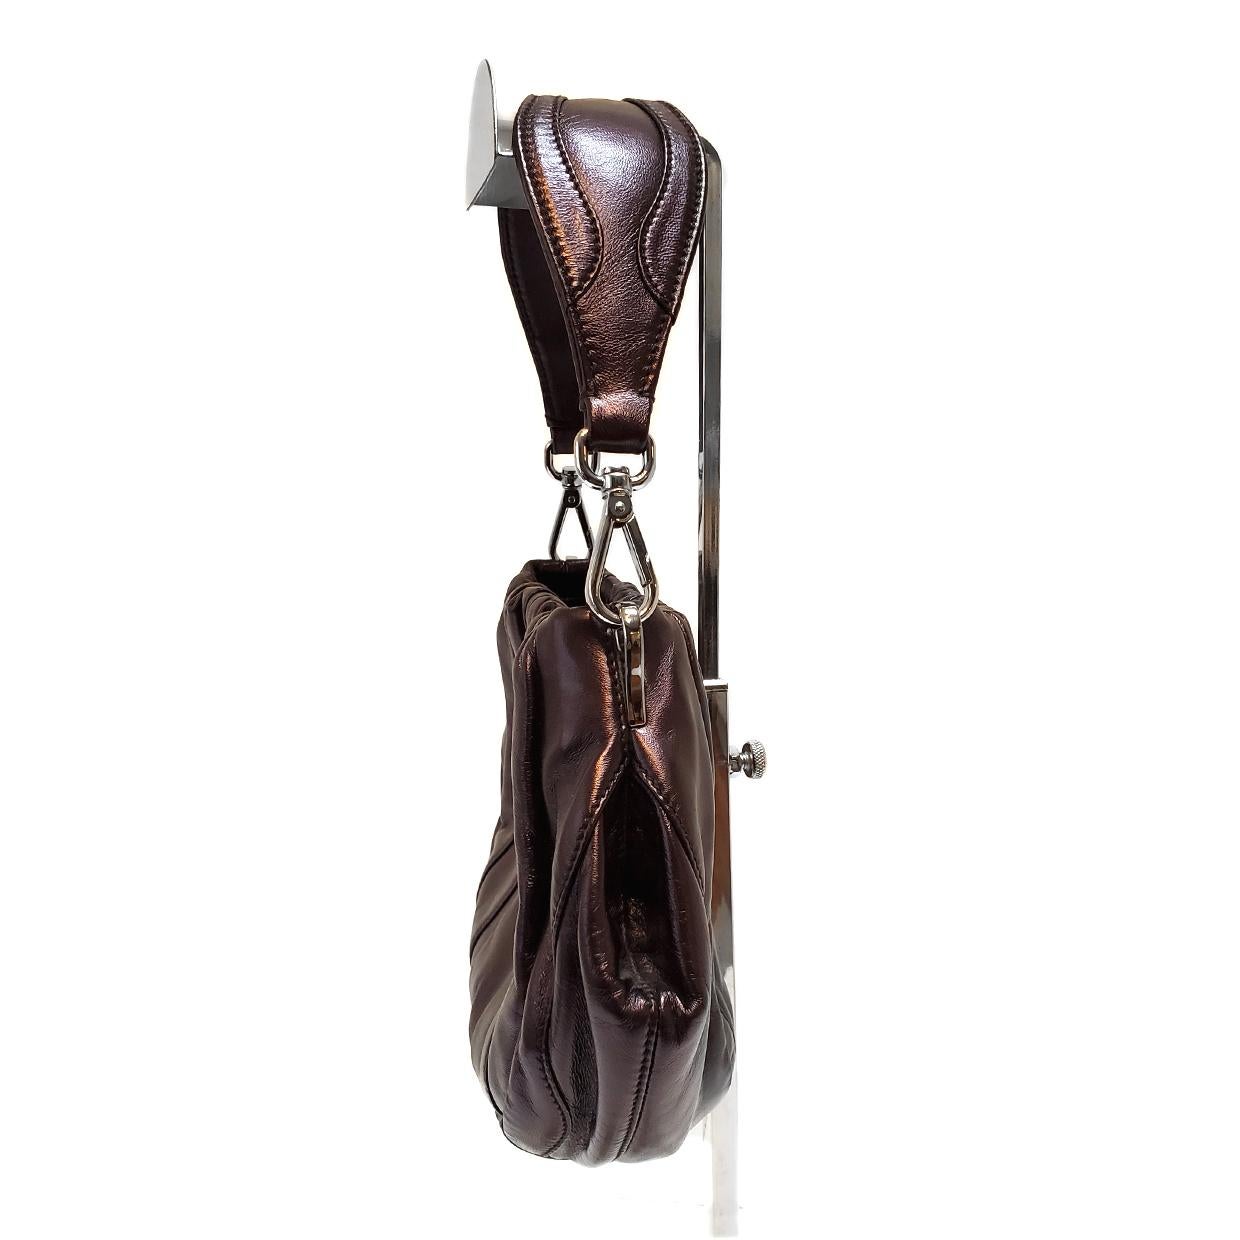 Brand - Prada
Collection - Nappa Waves
Estimated Retail - $1,495.00
Style - Hobo Bag
Material - Leather
Color - Metallic Wine
Closure - Snap
Hardware Material - Silvertone
Size - Small
Feature - Detachable Strap
Accent - Additional Crossbody